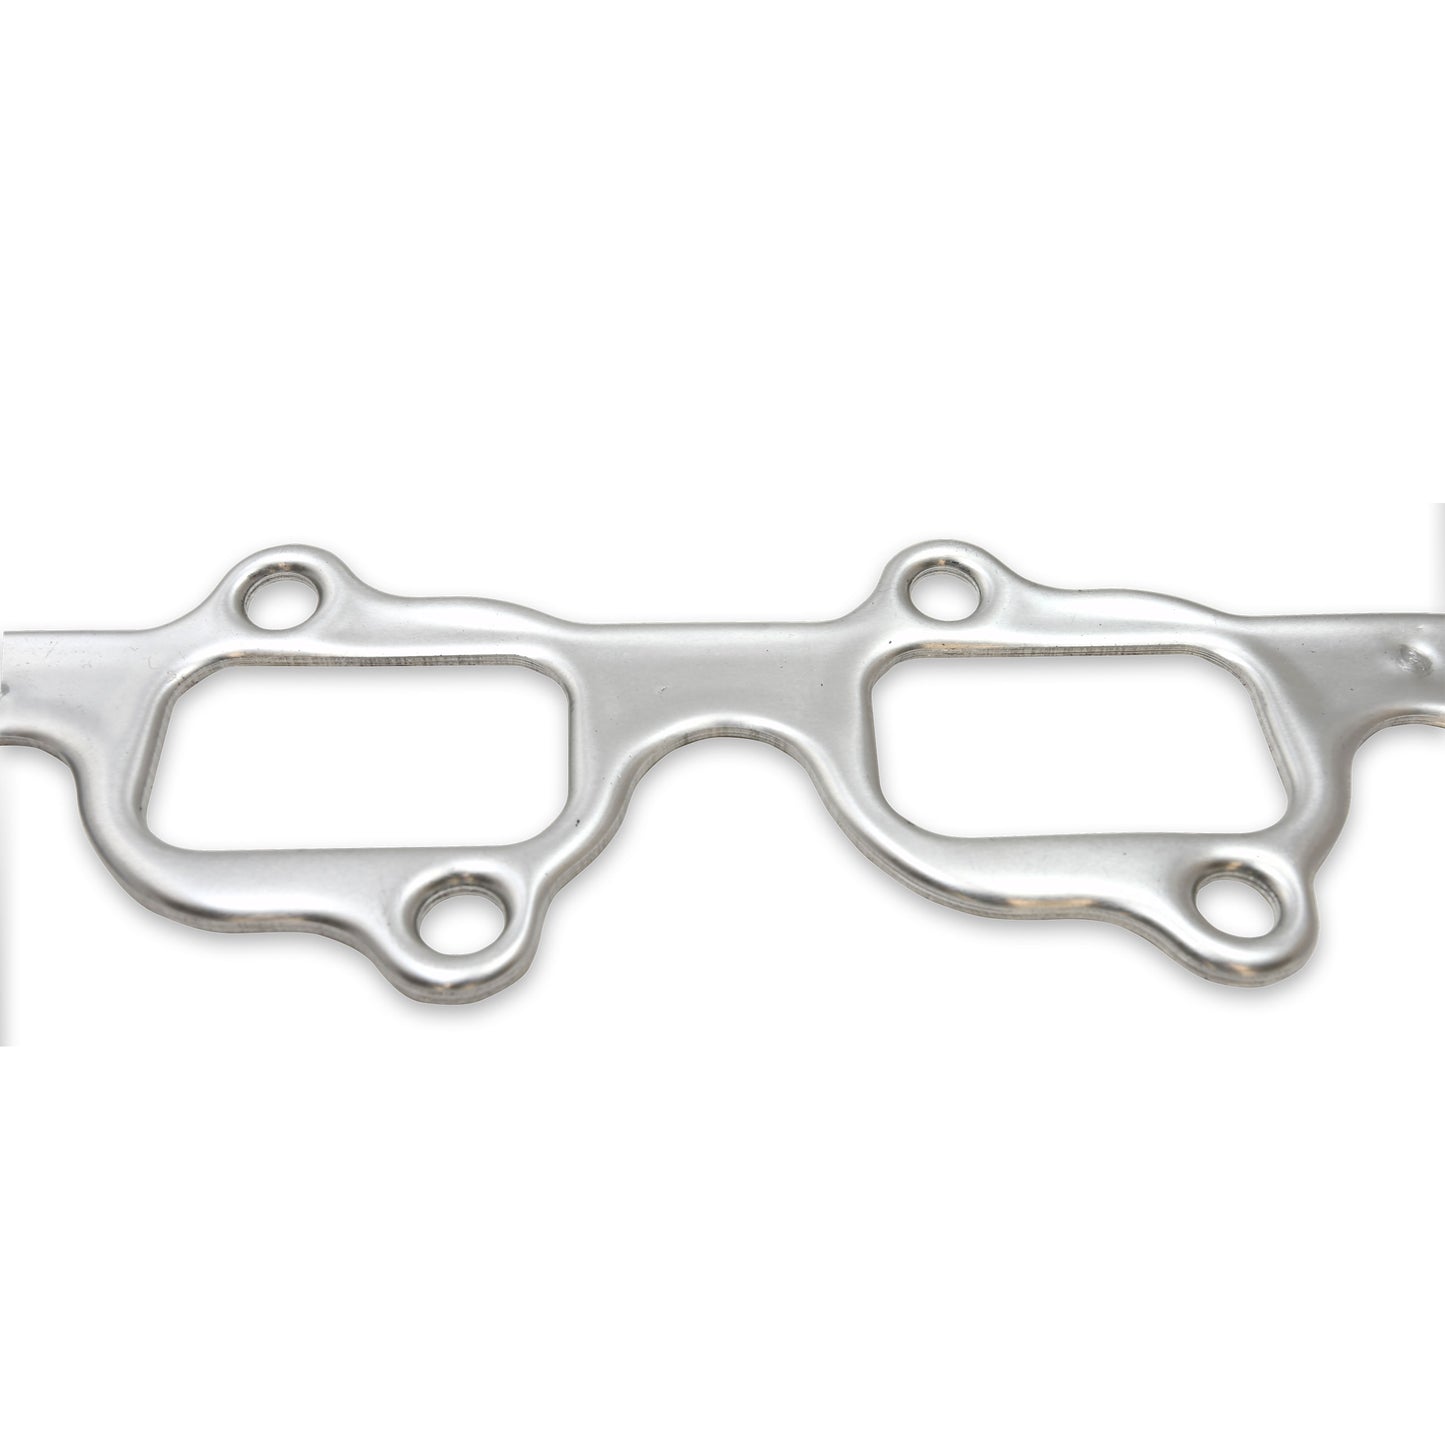 Patriot Exhaust 66083 Seal-4-Good Gaskets Ford Cobra Supercharged 2003-4